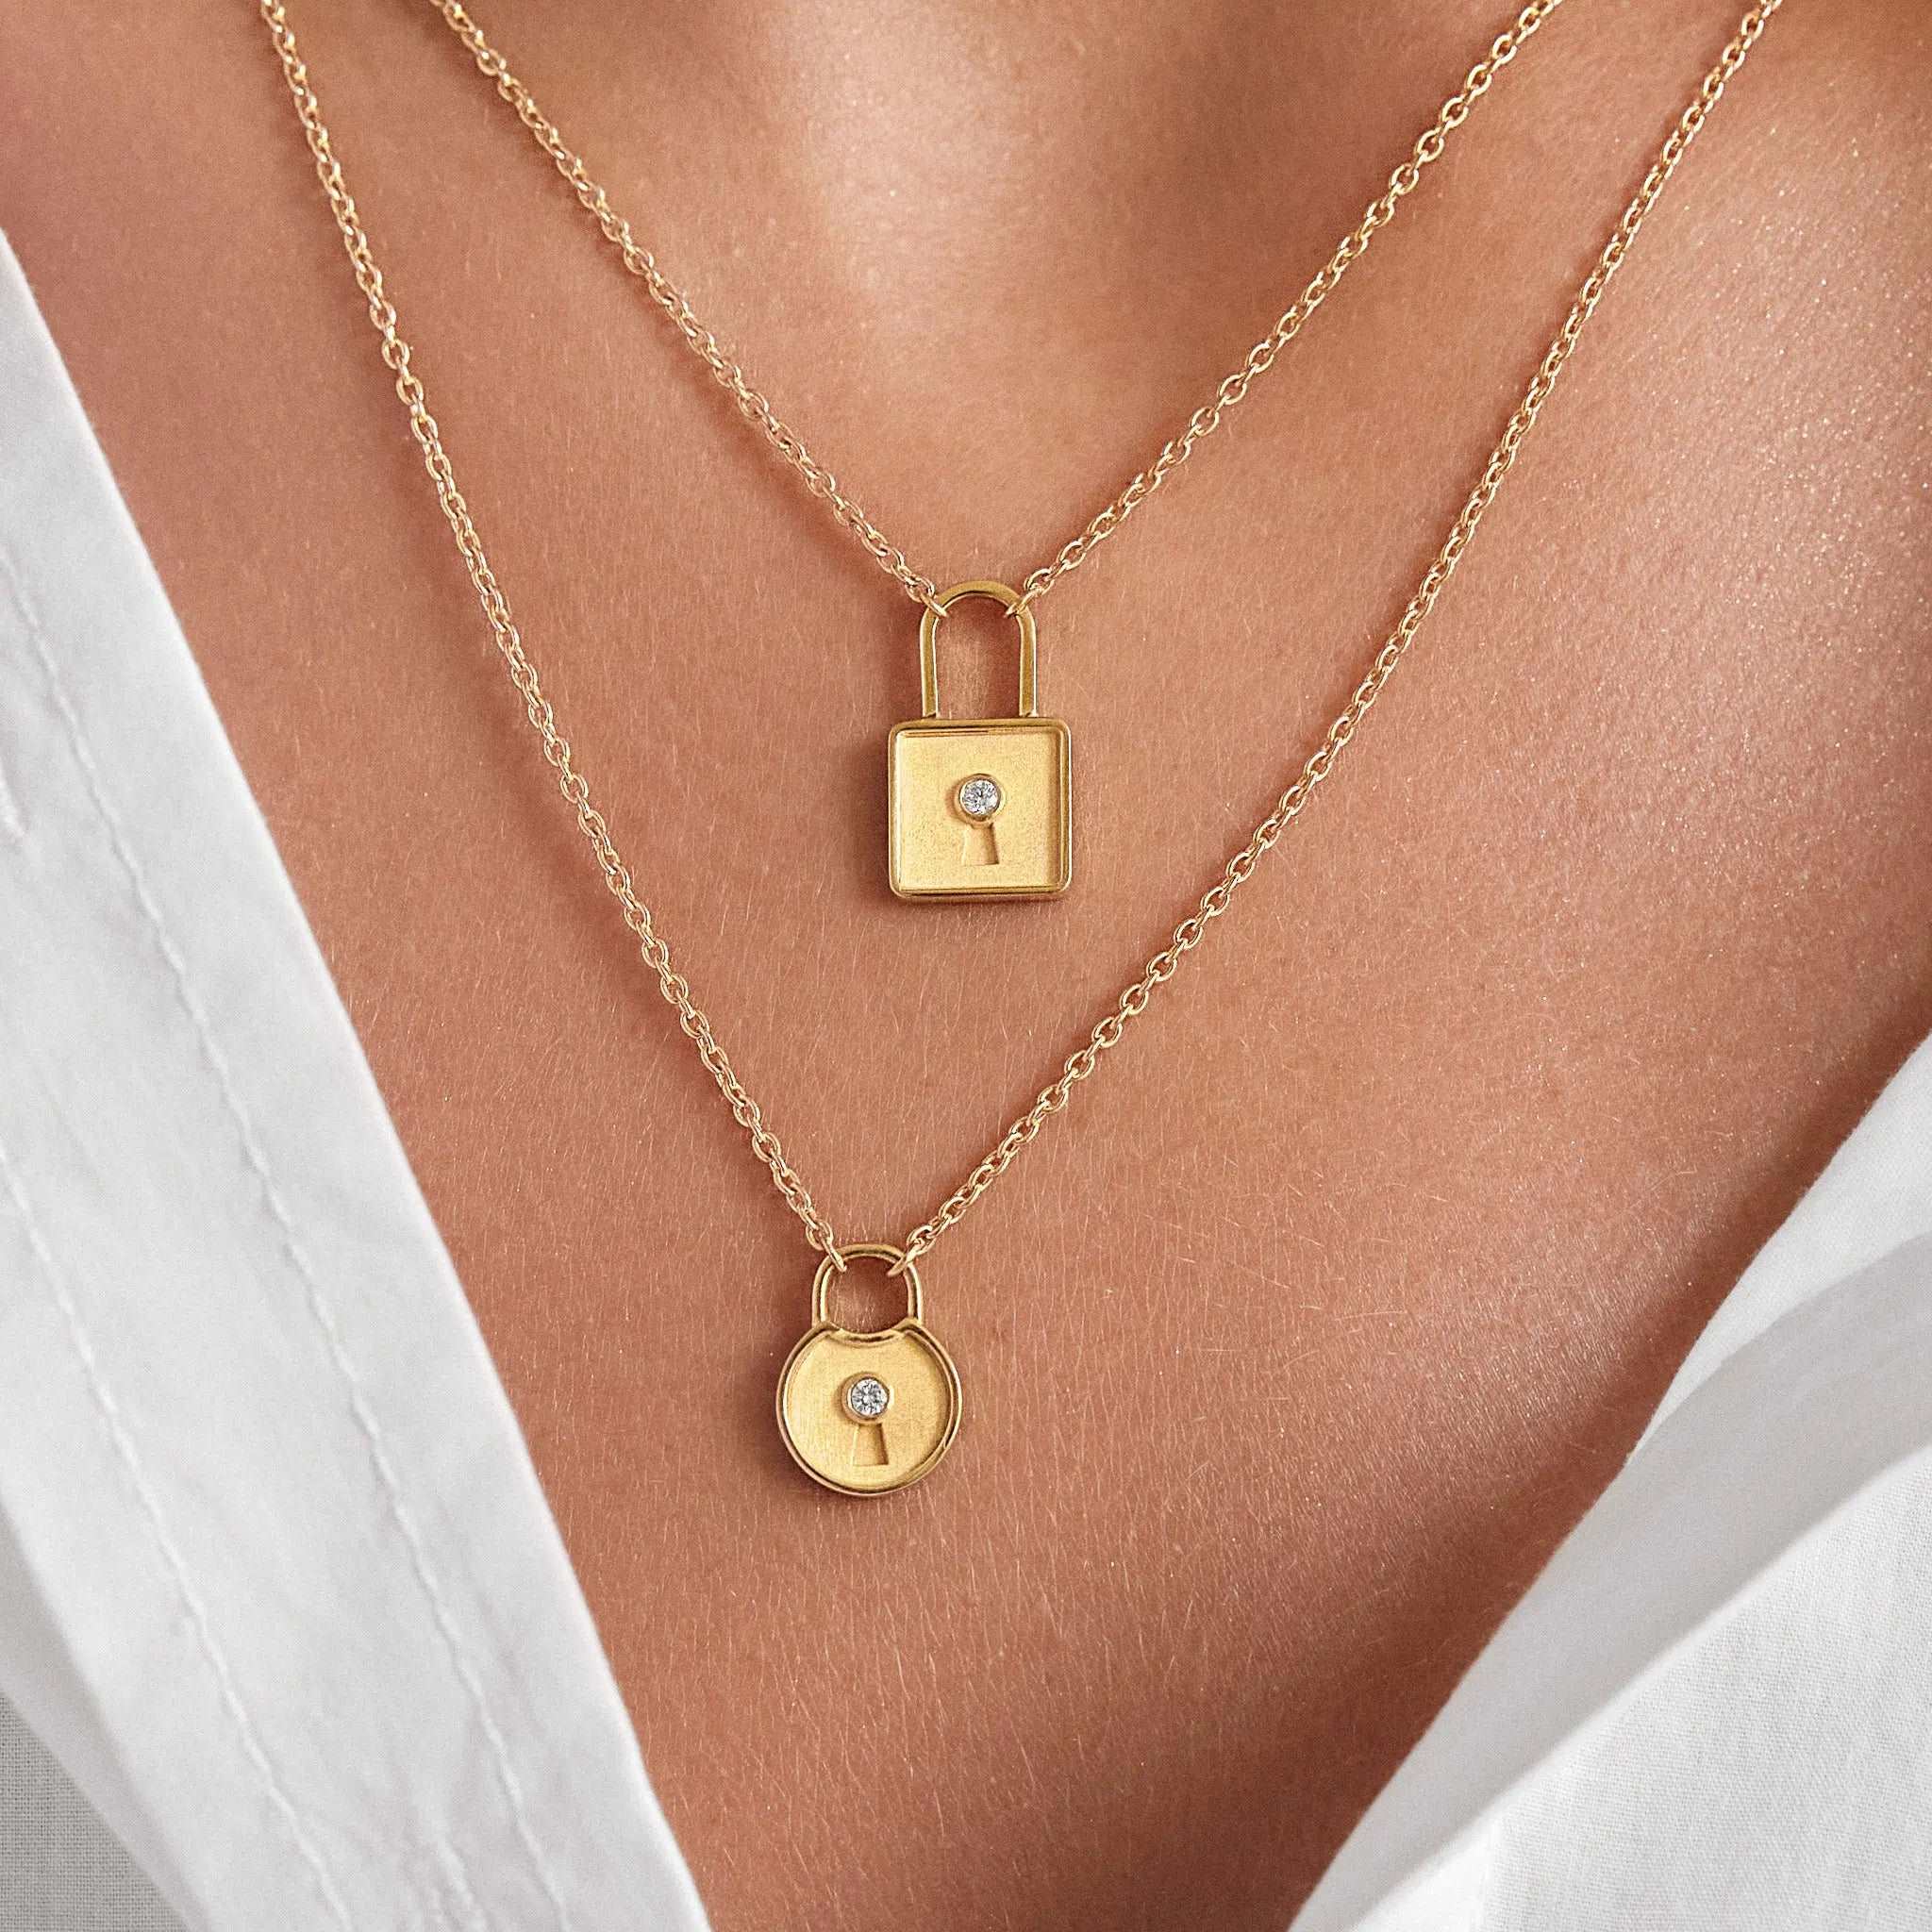 Gold Lock Necklace Gold Padlock Necklace Lock Jewelry -  Hong Kong